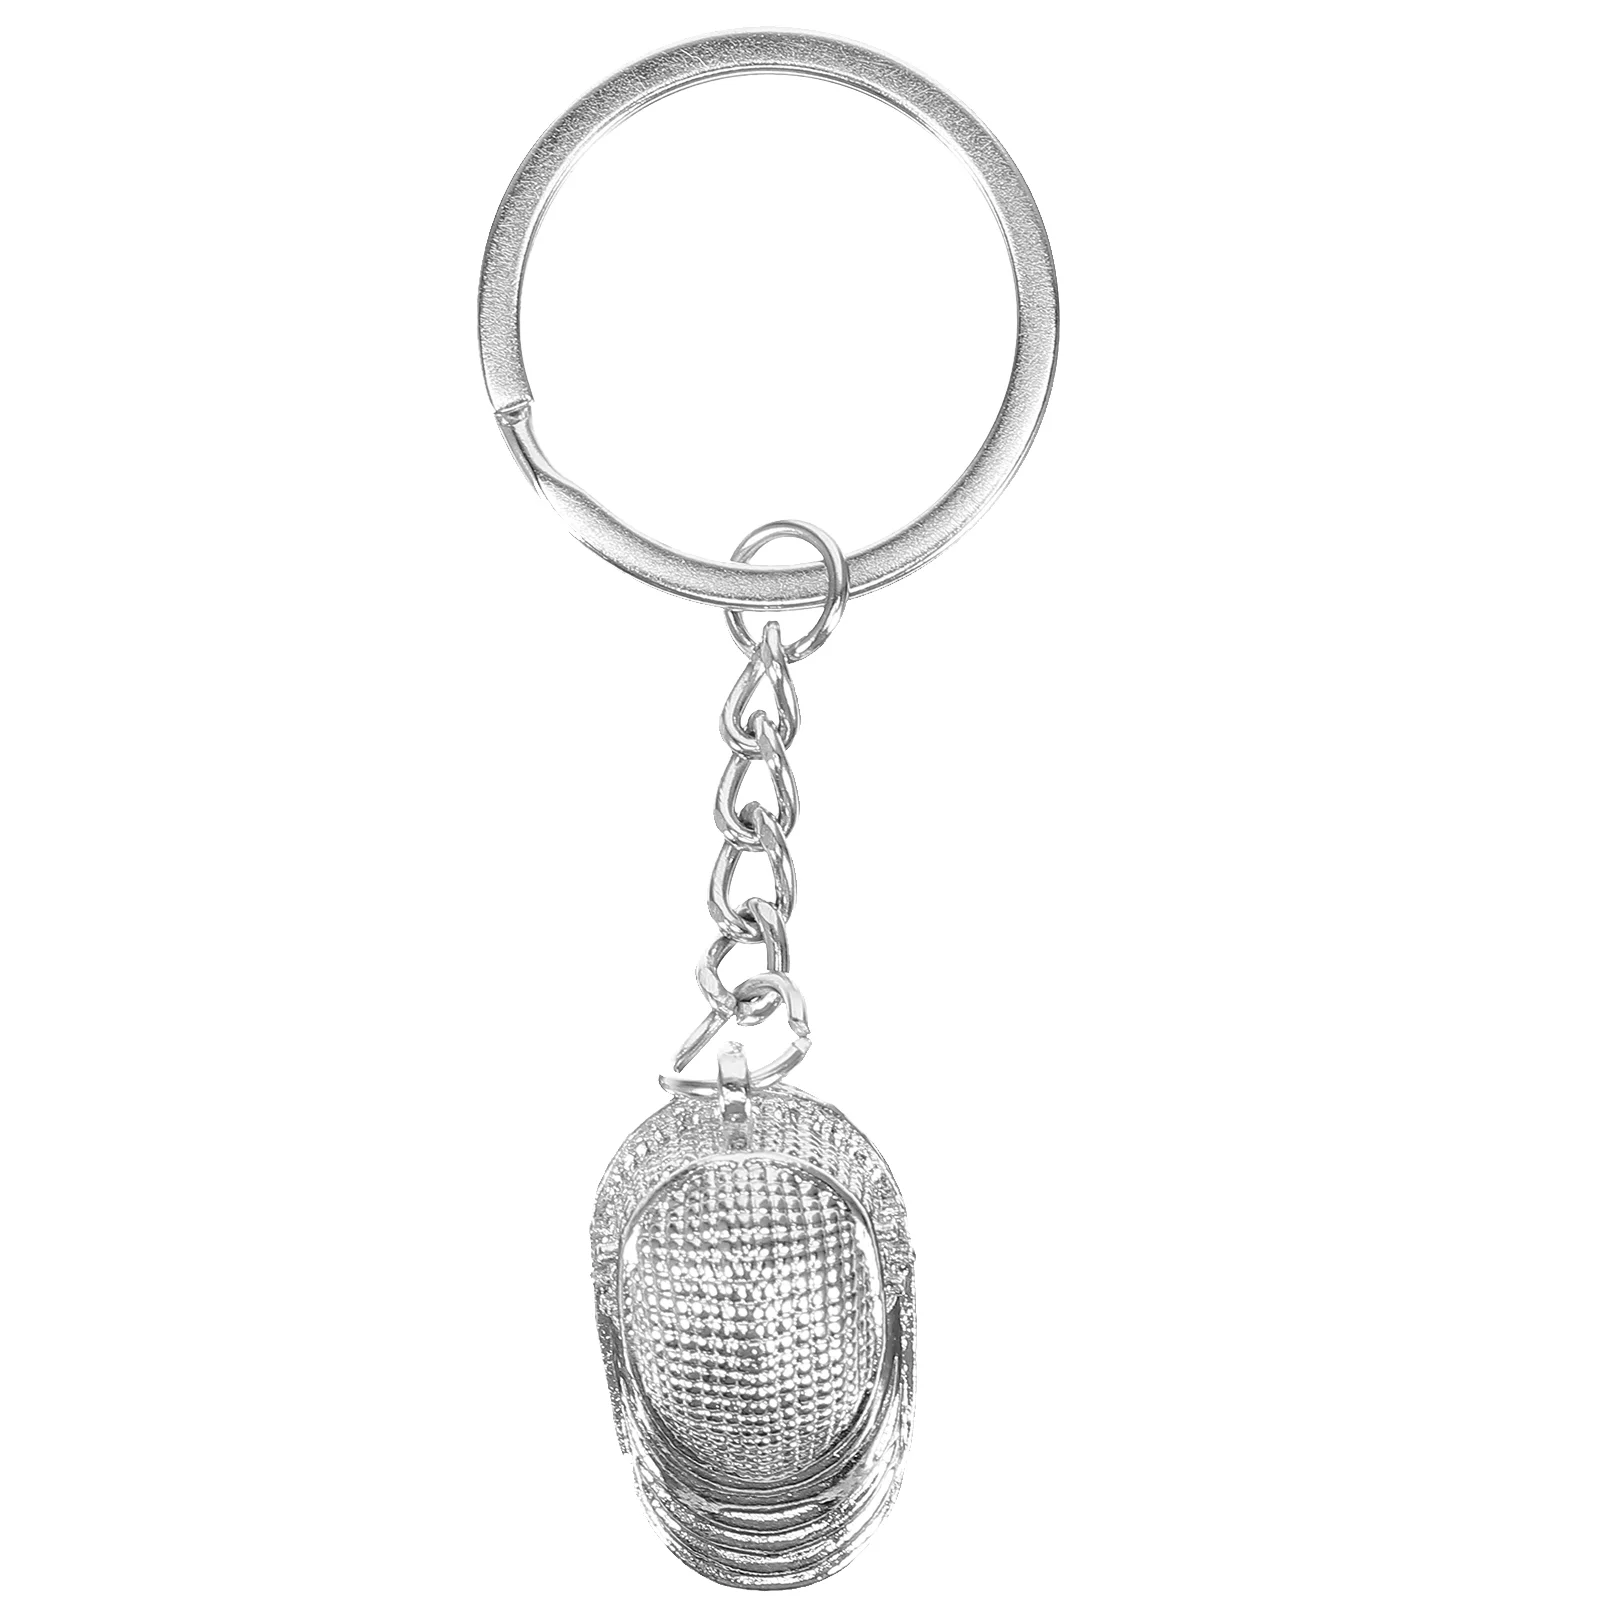 

Fencing Keychains Decorative Fencing Sport Metal Exquisite Backpack Pendant Souvenir Fencing Keychains Fencing